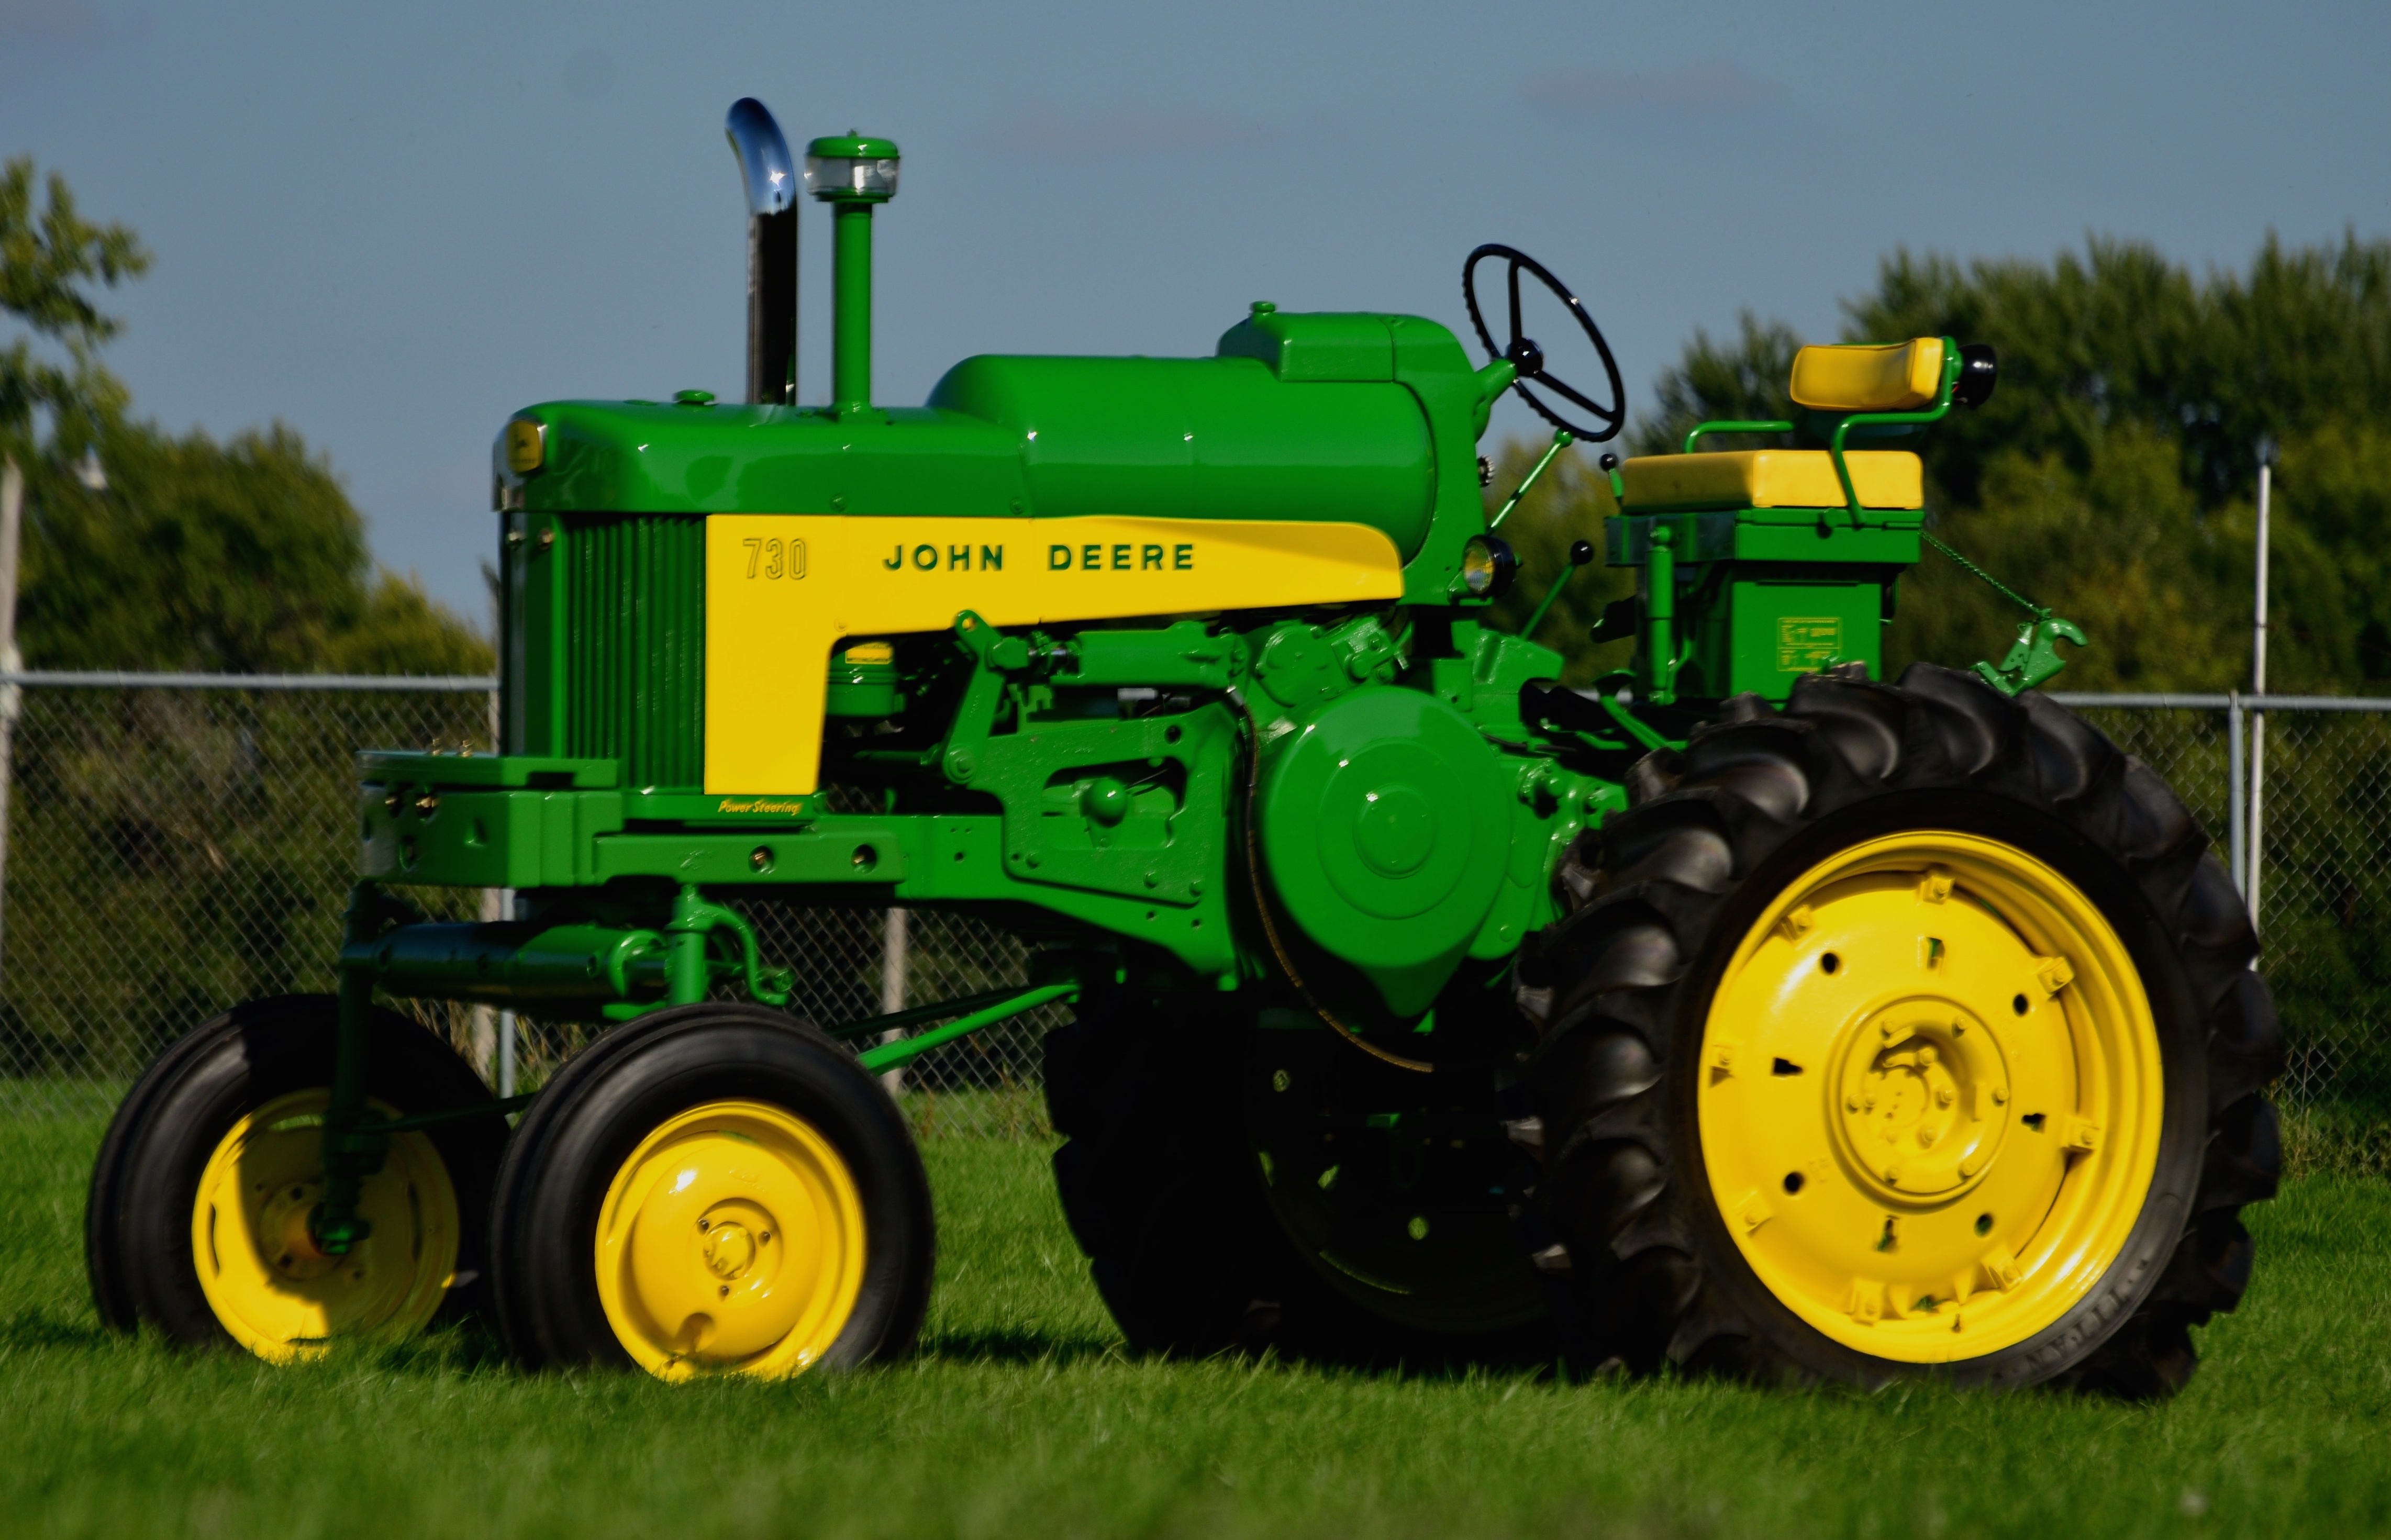 Farmer knows best? Mecum's vintage tractor sale tops $2 mill